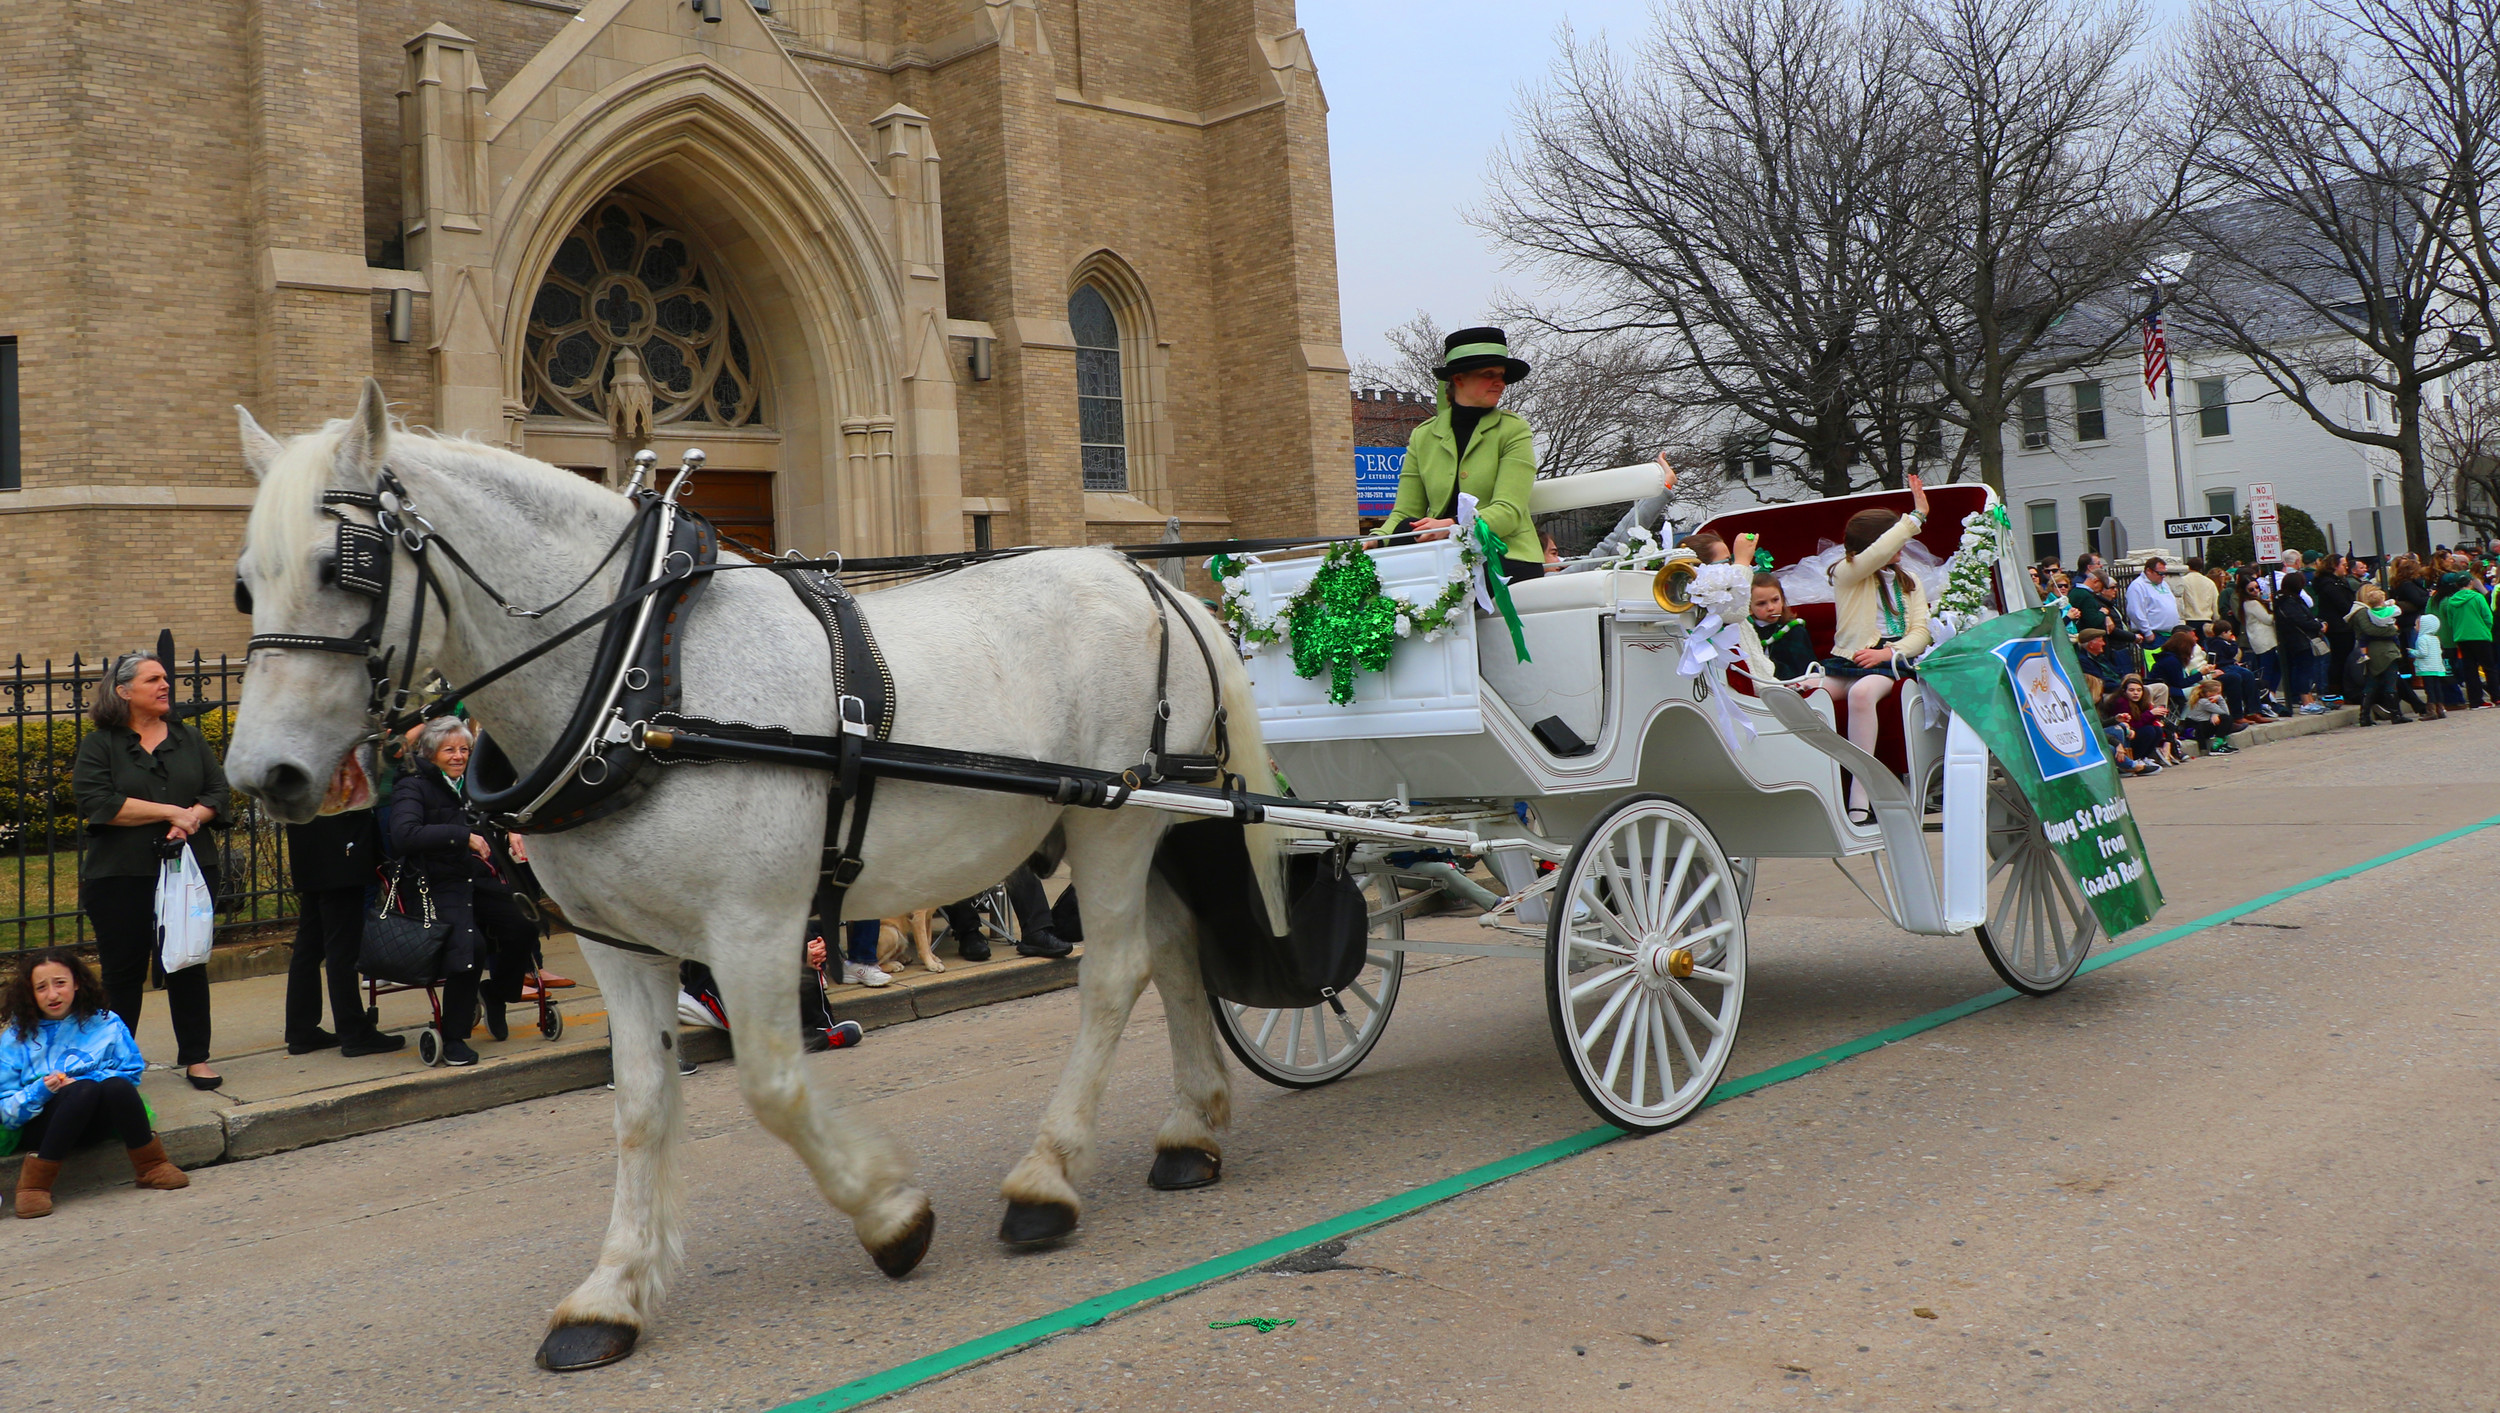 Coach Realtors marched with a horse and carriage on Saturday.